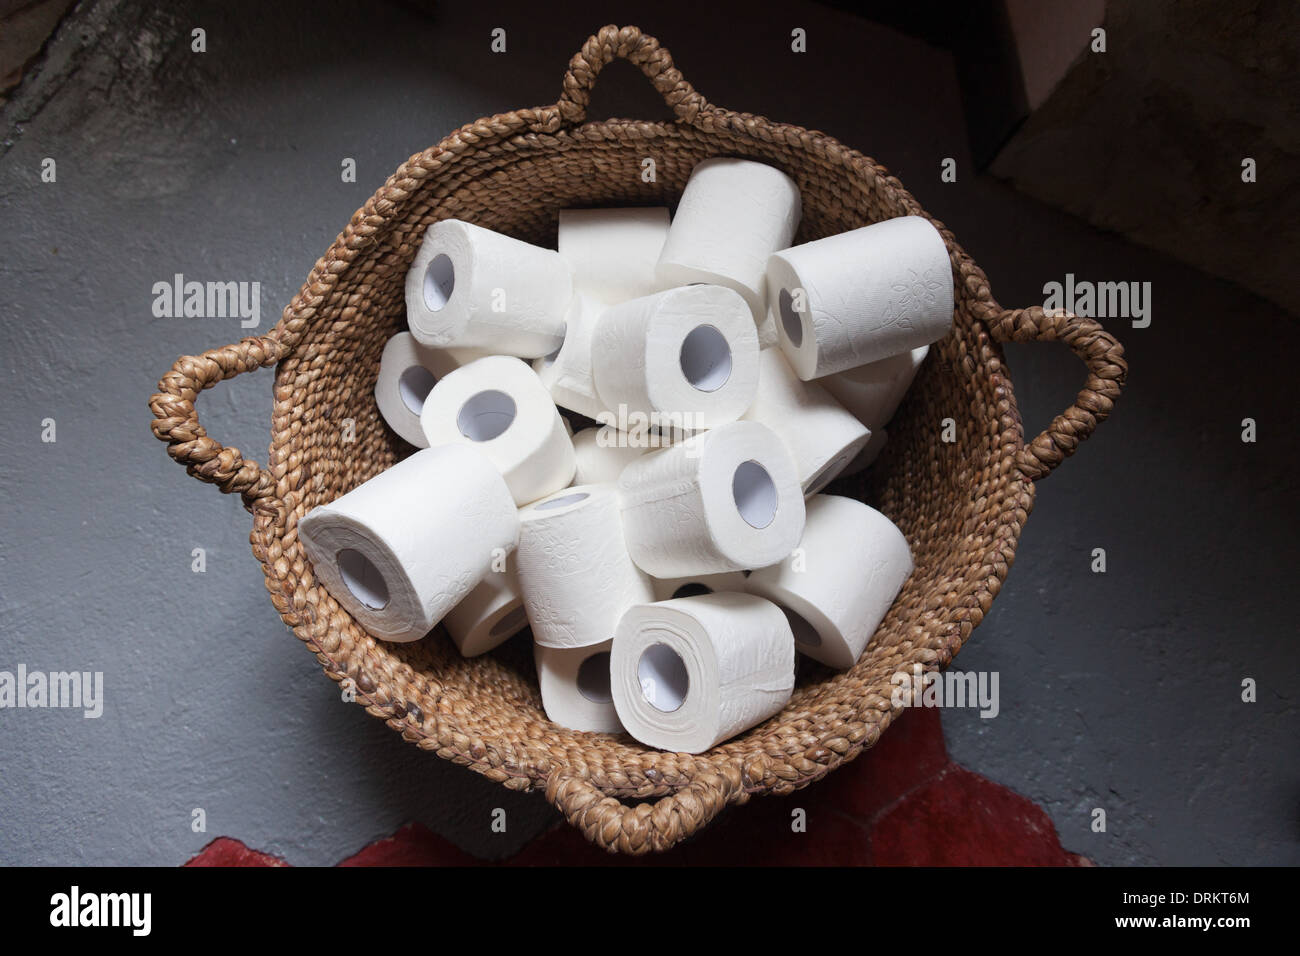 Toilet paper rolls in a basket. Stock Photo